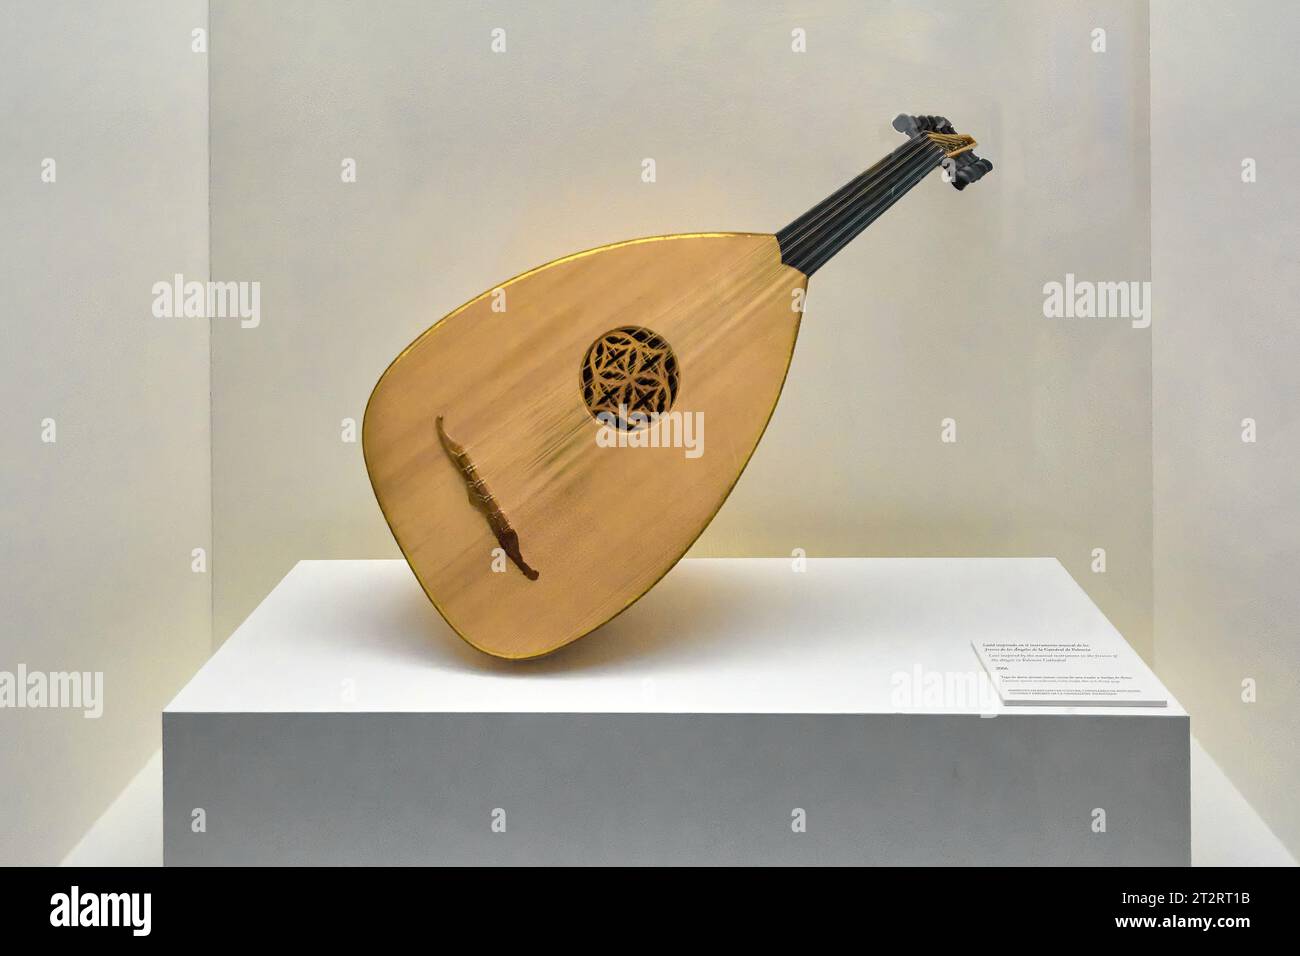 Lute inspired by the musical instrument from the frescoes of the angels in the Valencia Cathedral museum Thyssem Bonemisza. Stock Photo